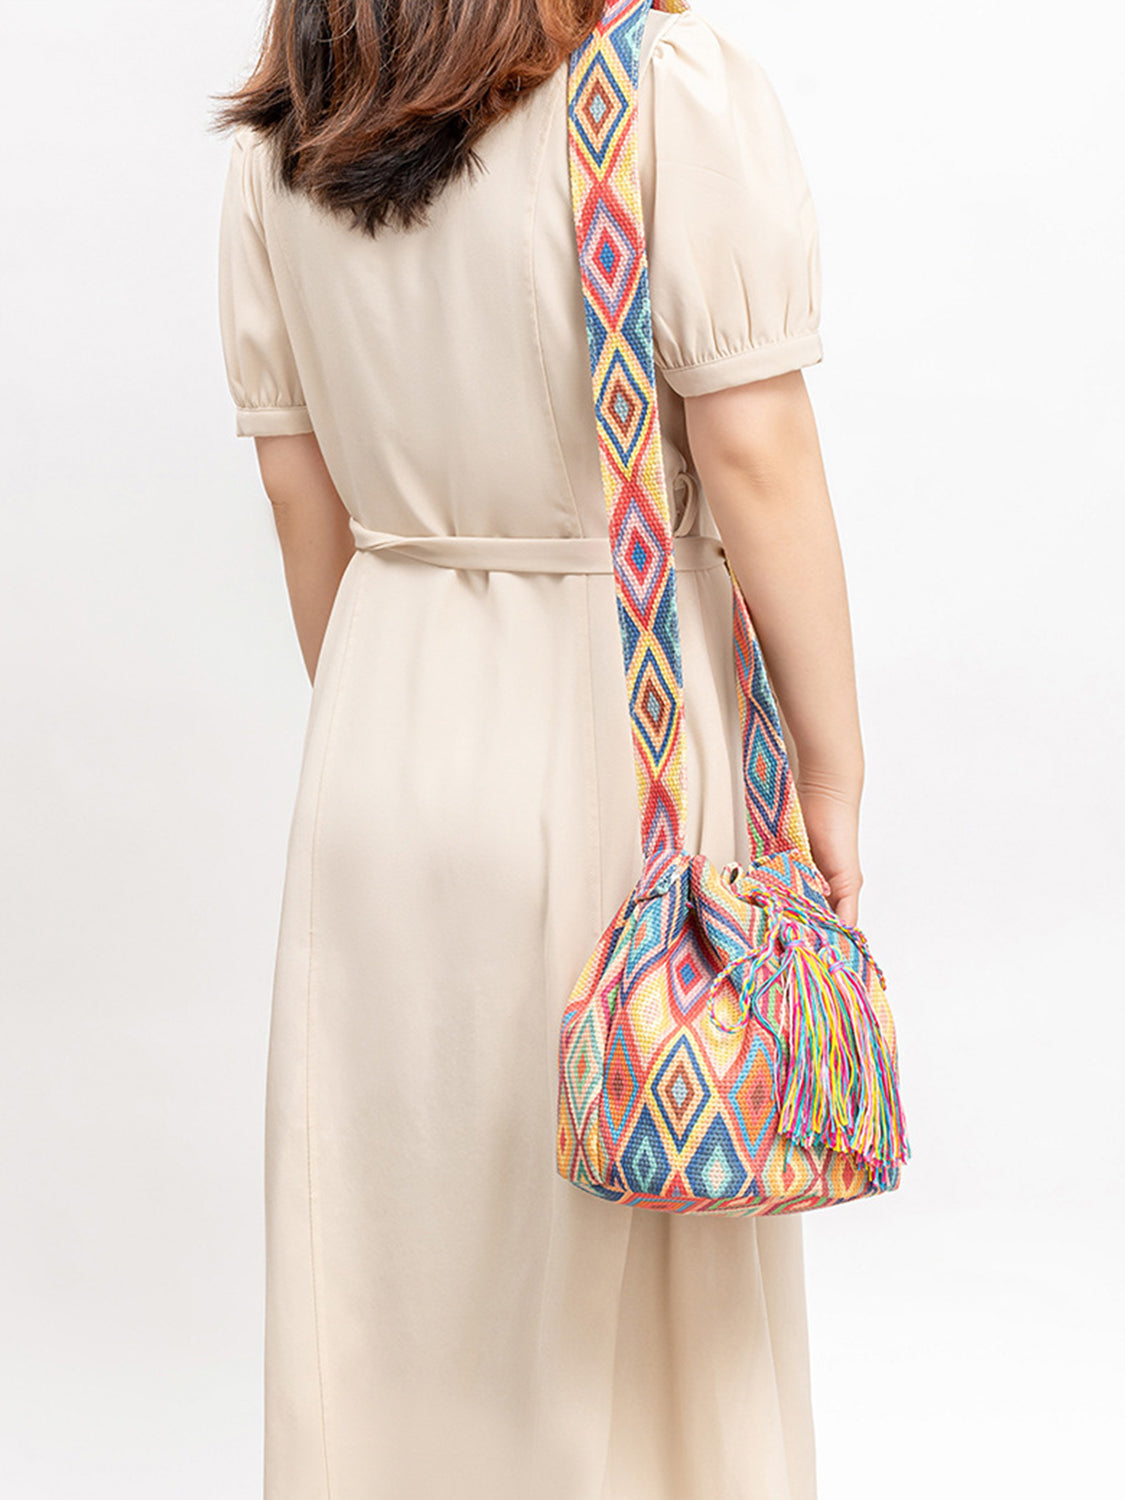 Multi-colored geometric patterned bucket bag with tassels.